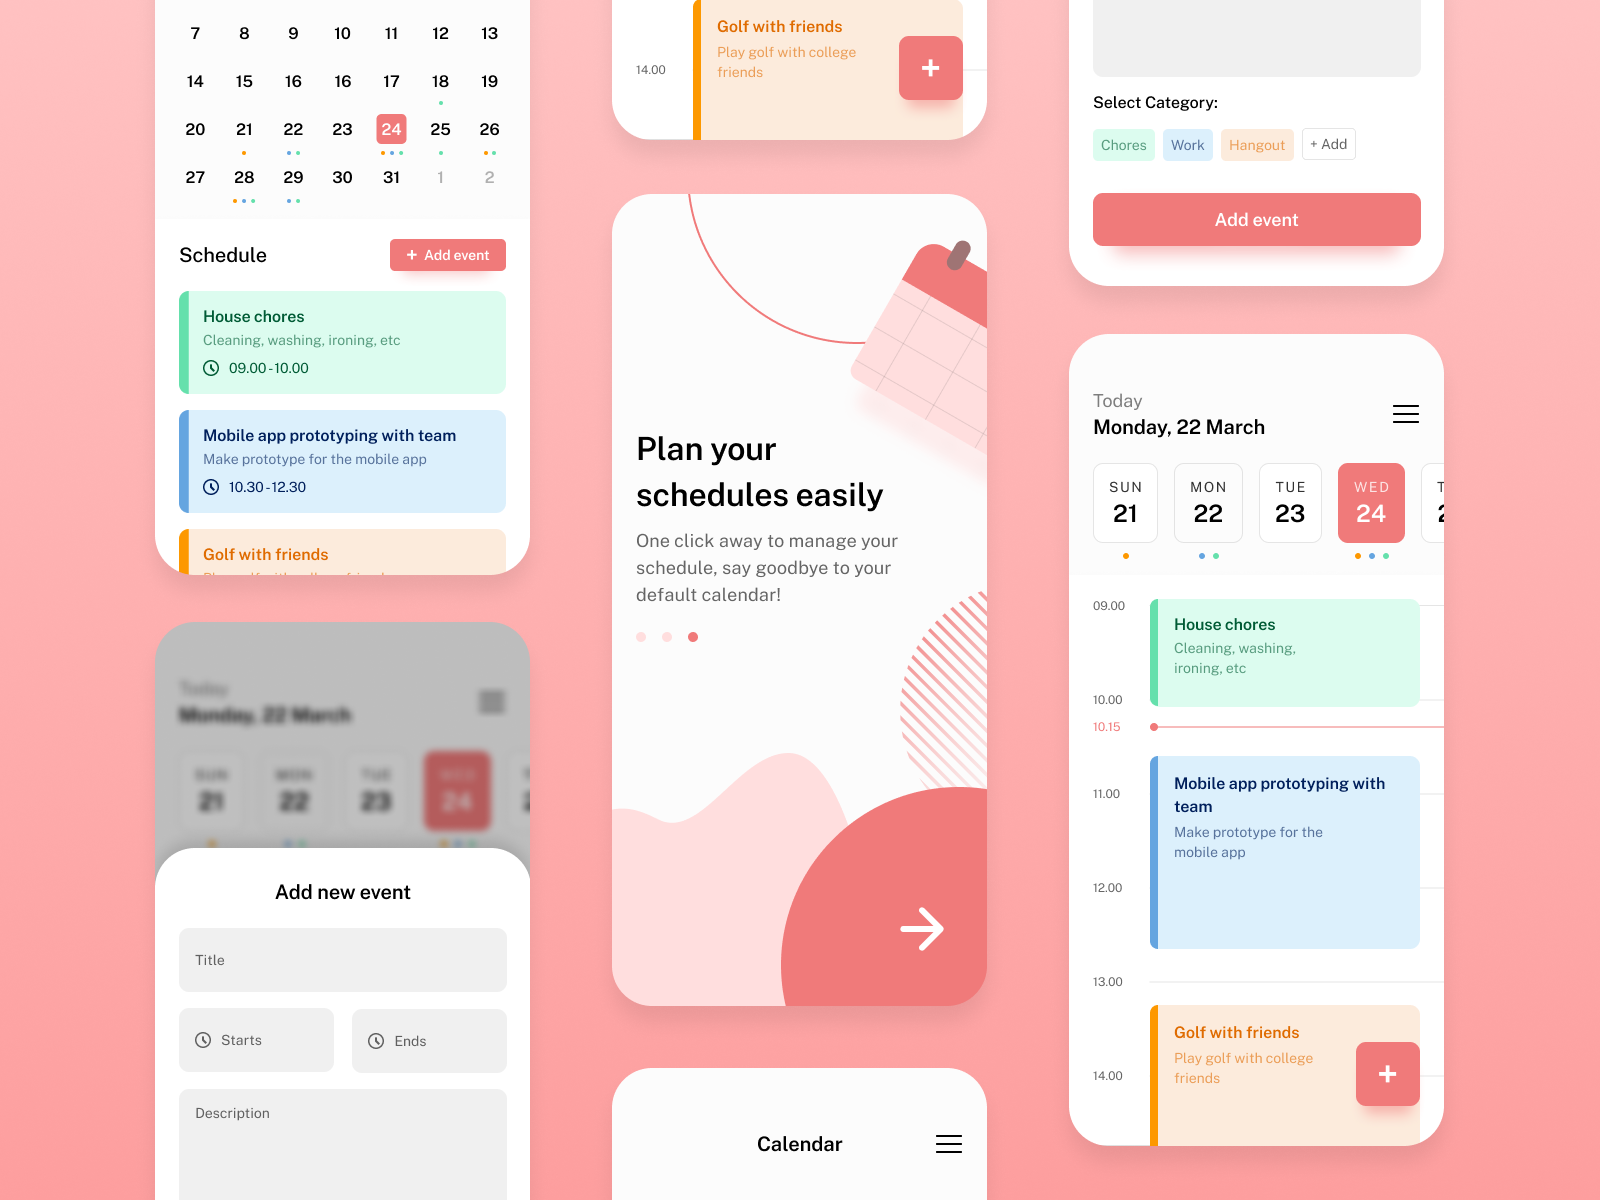 Calendar/Schedule Management App by Arvin Aradhana on Dribbble